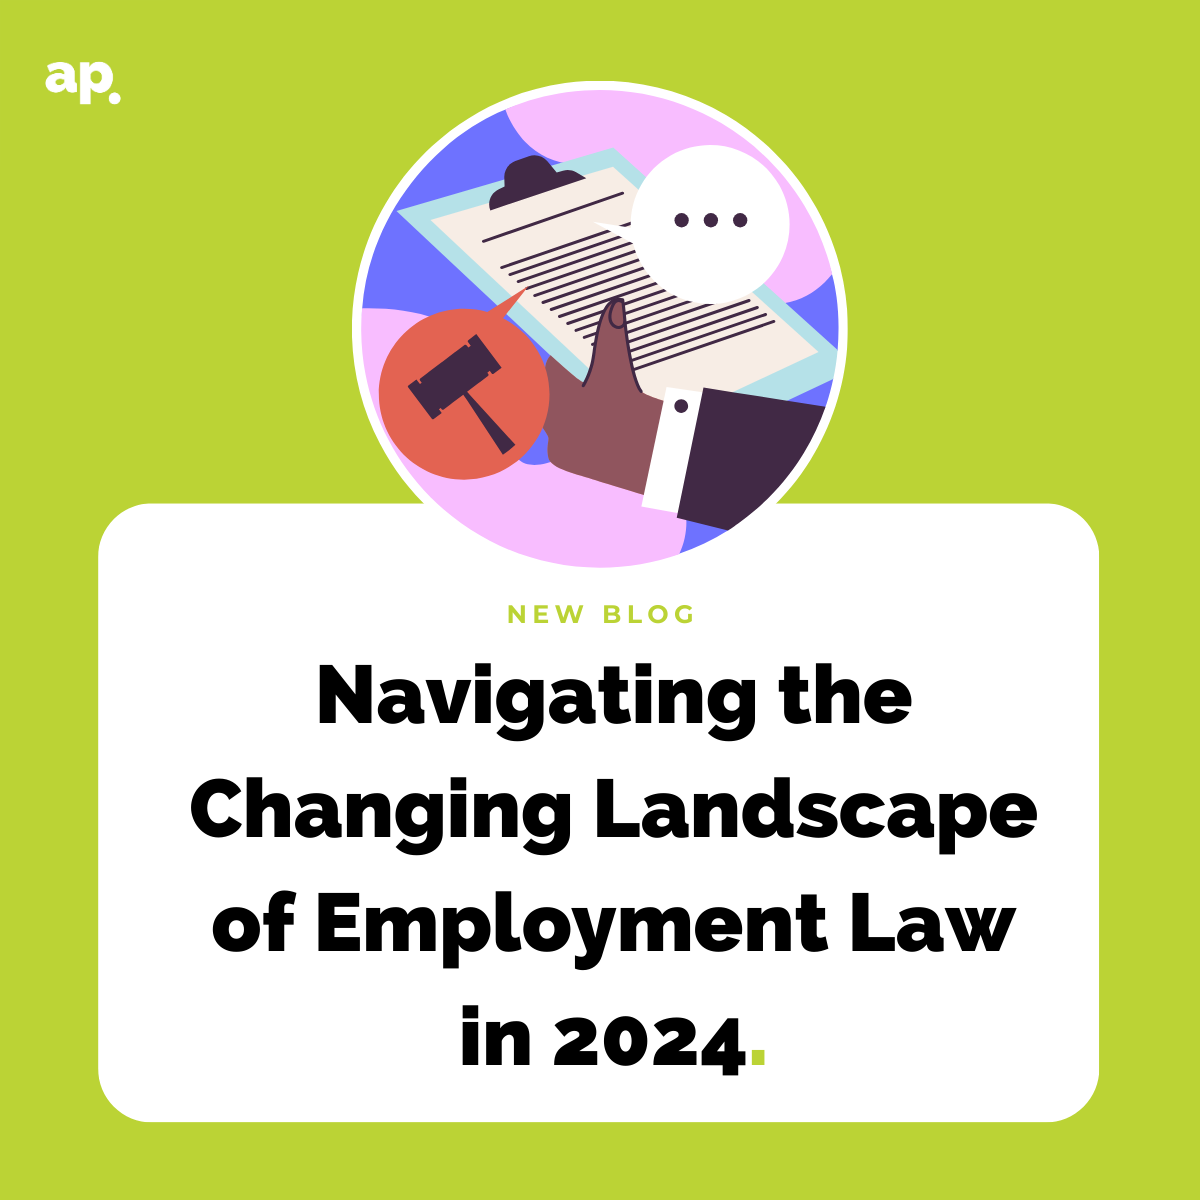 A blog post about navigating the changing landscape of employment law in 2024